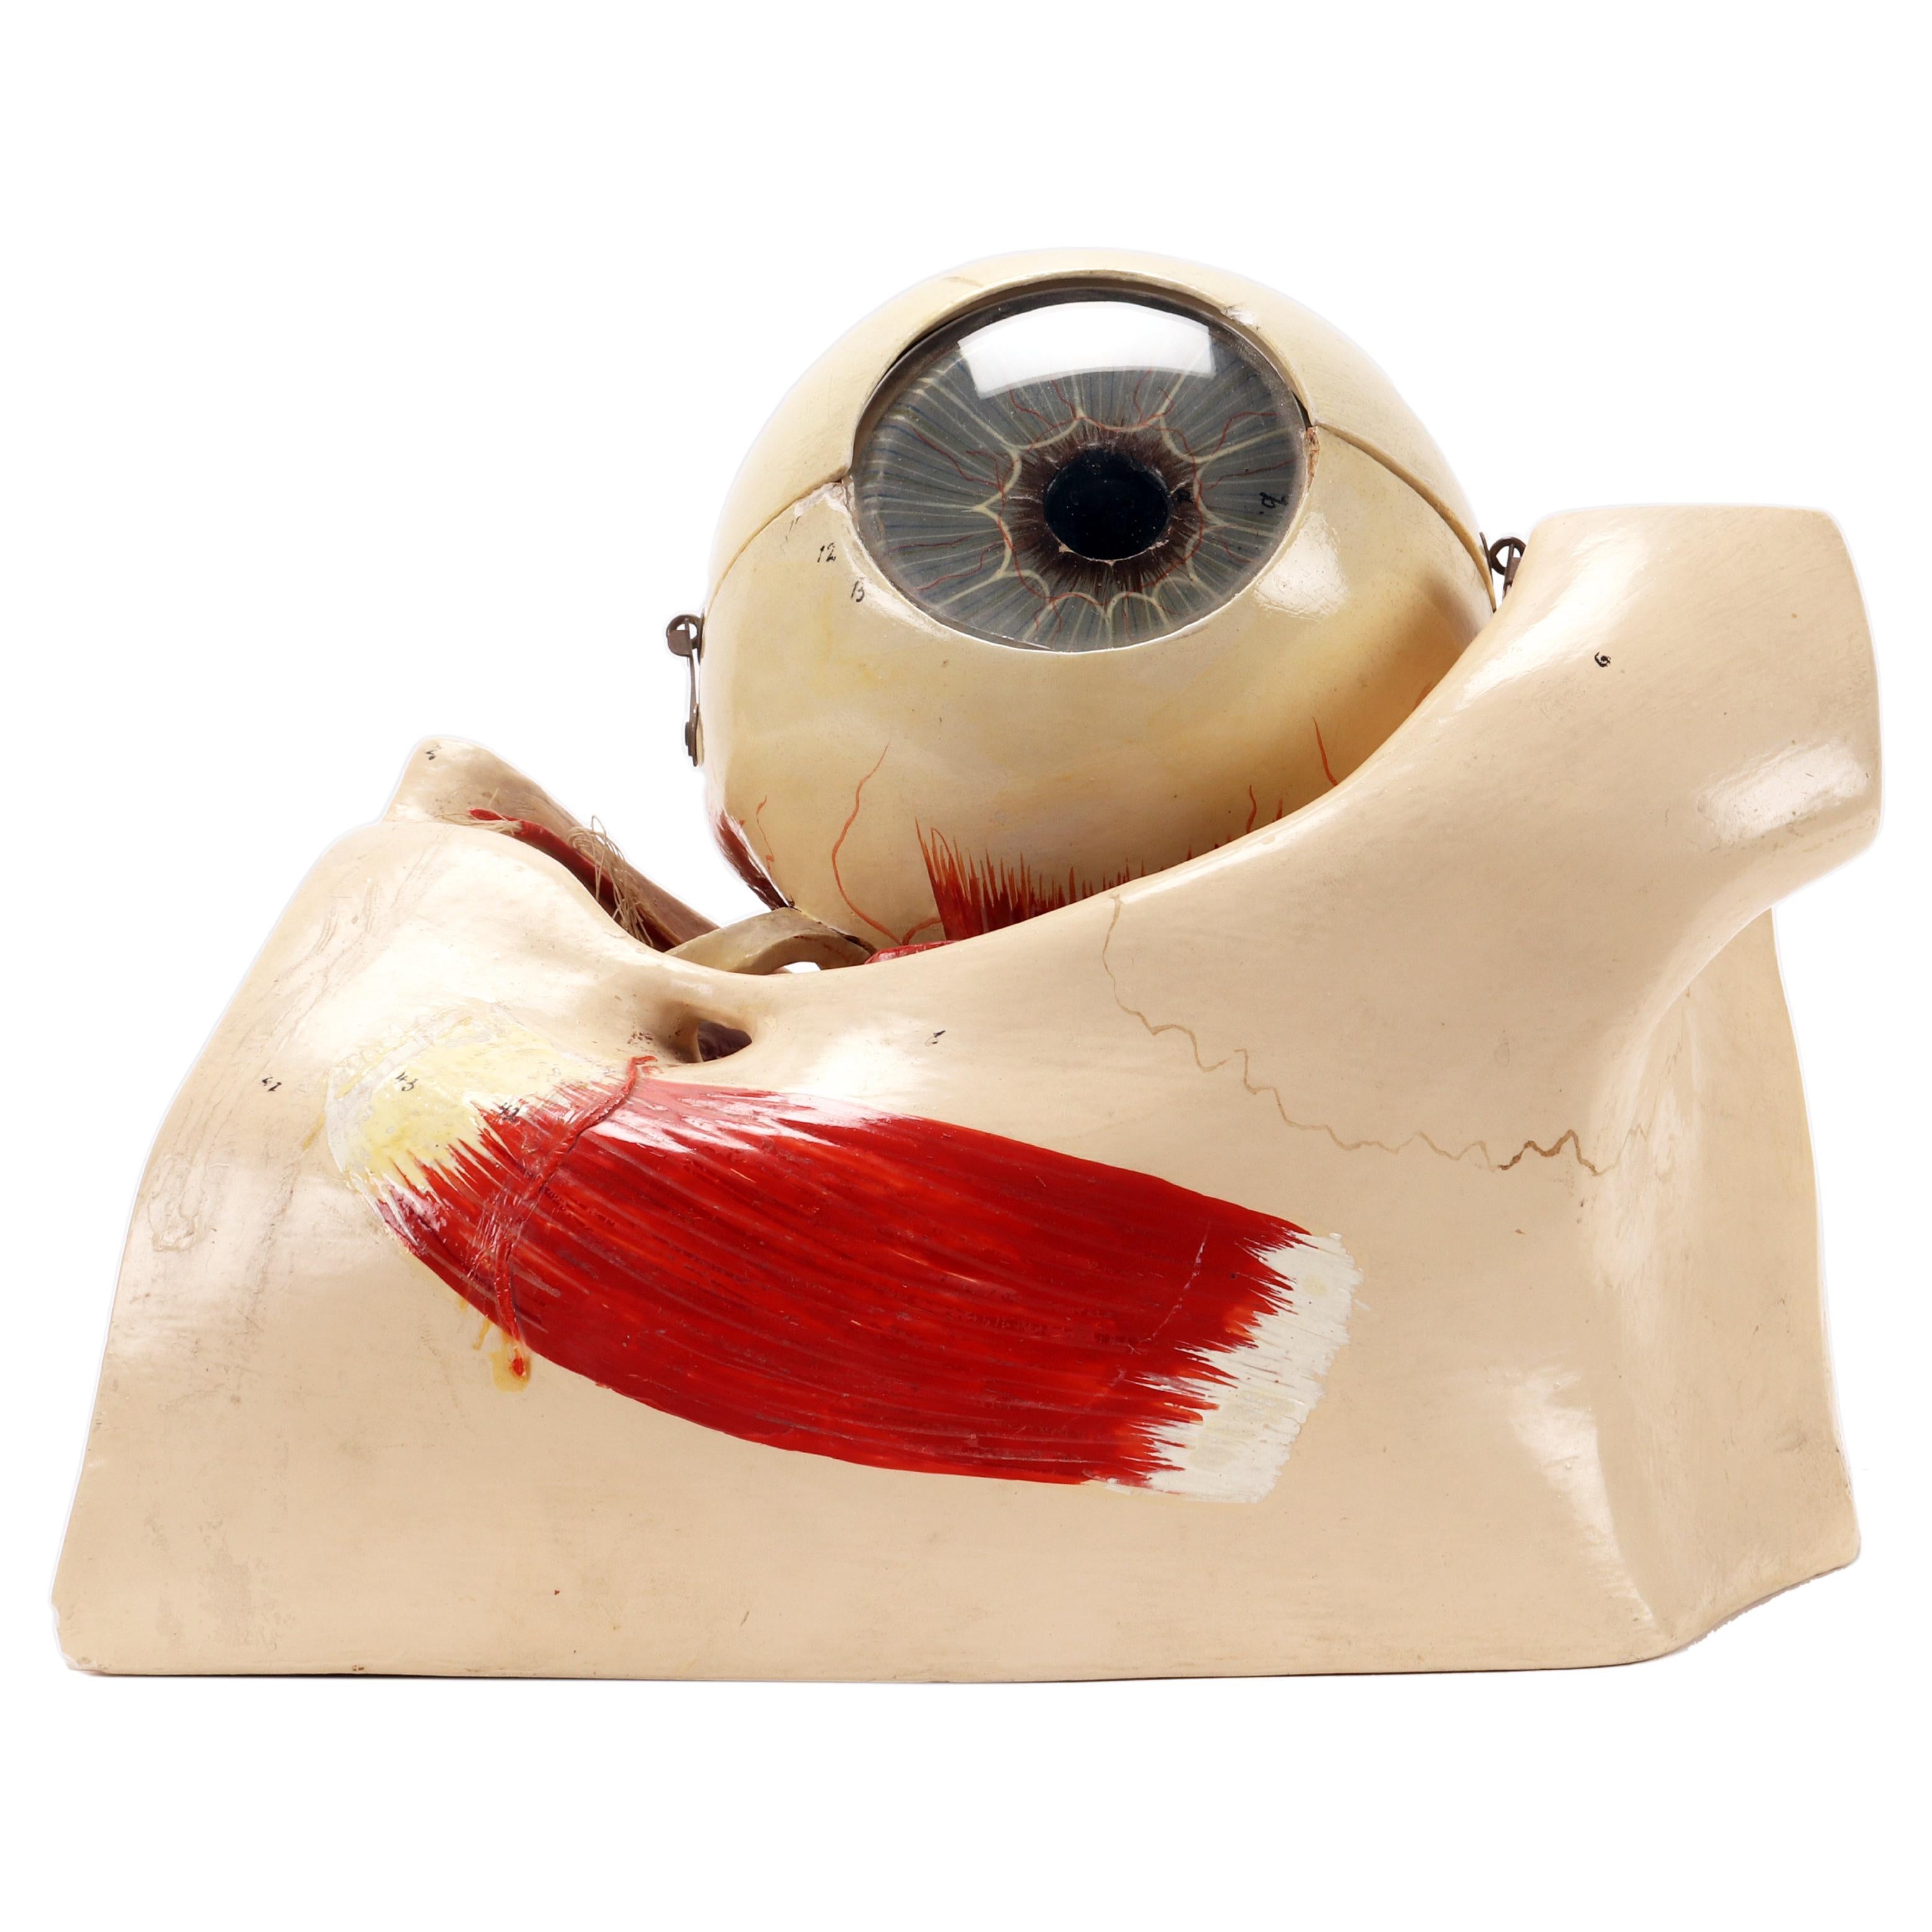 Rare anatomical model for schools, educational use, depicting a decomposable eyeball, complete in all its parts, made of plaster, glass and painted paper mache, metal hooks. Italy circa 1890.